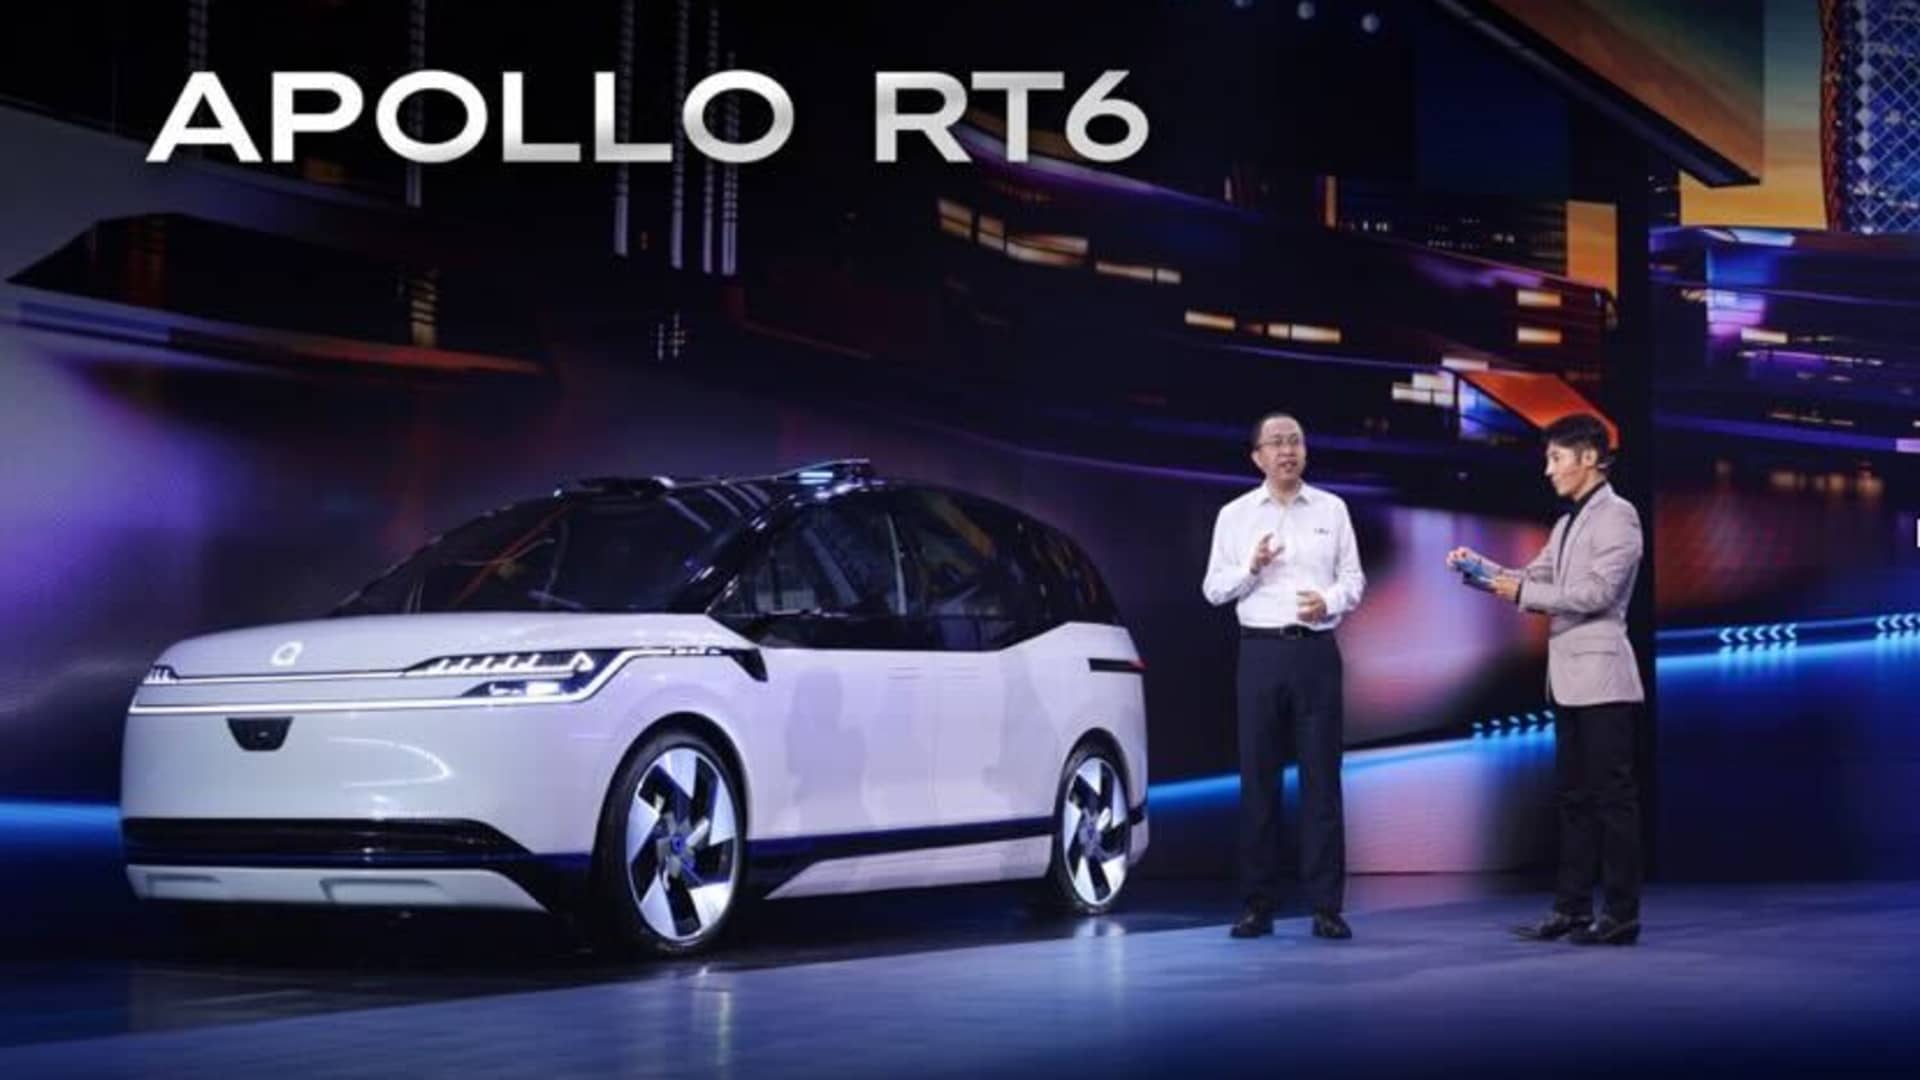 Baidu’s new robotaxi can drive without a steering wheel and is 50% cheaper